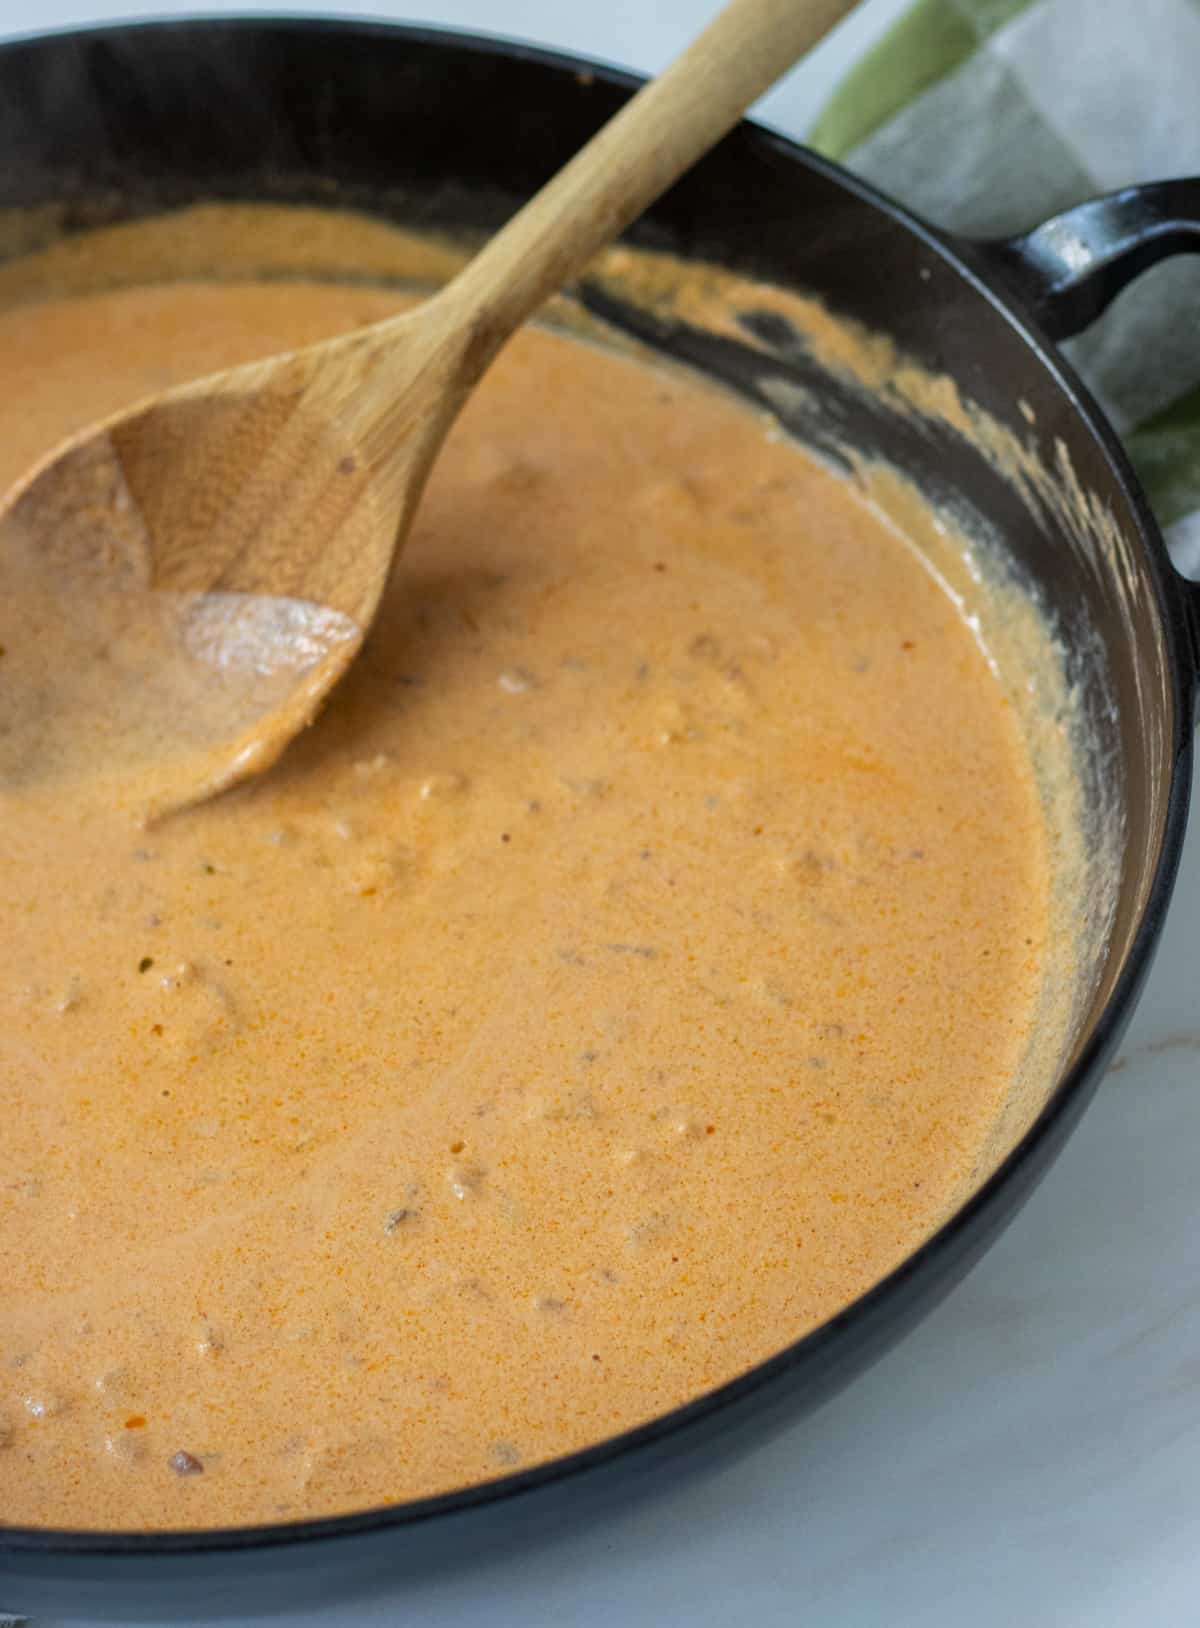 Creamy tomato sauce in a skillet with a wood spoon.